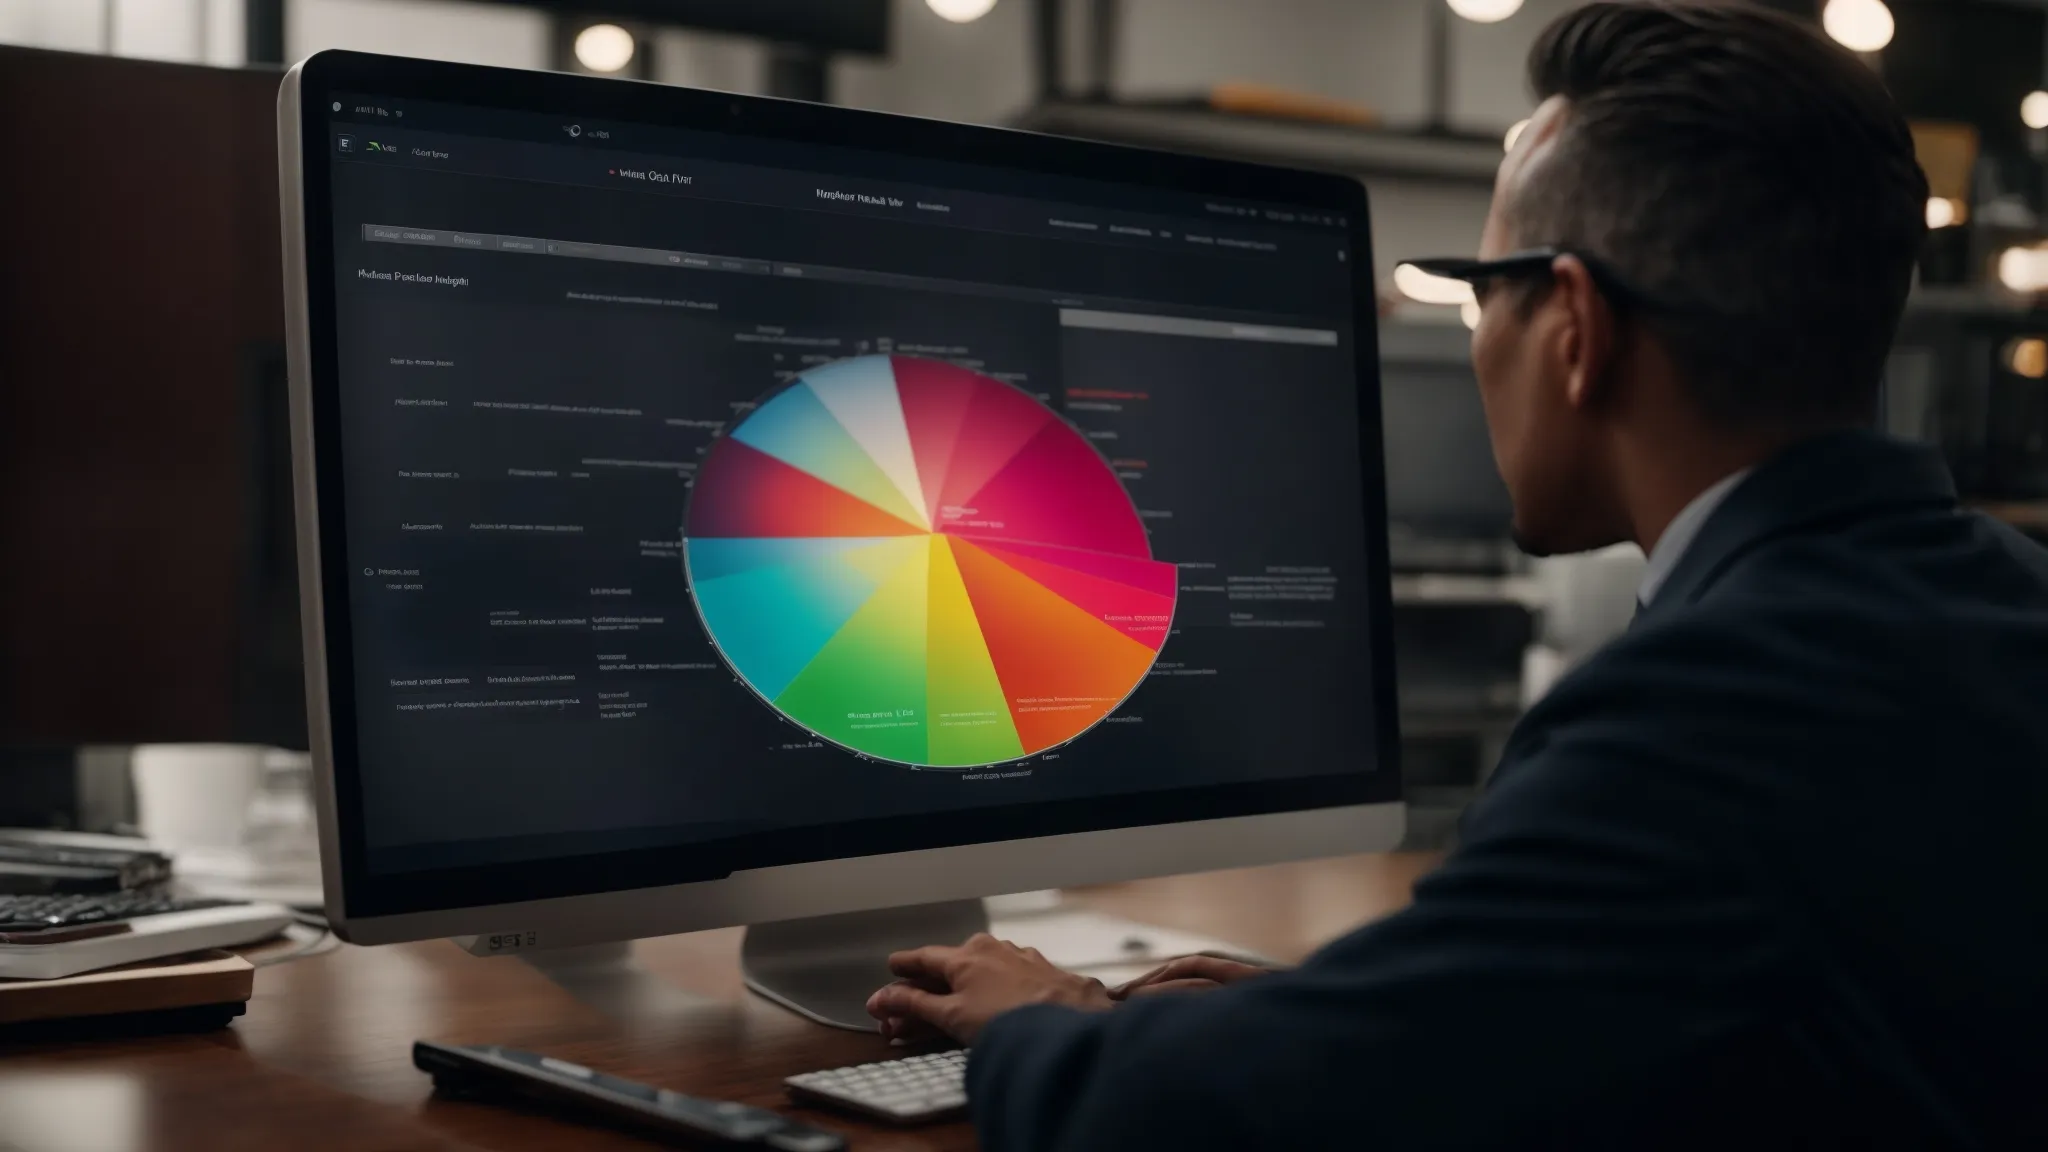 a marketer analyzing a colorful pie chart on a computer screen to strategize seo efforts.